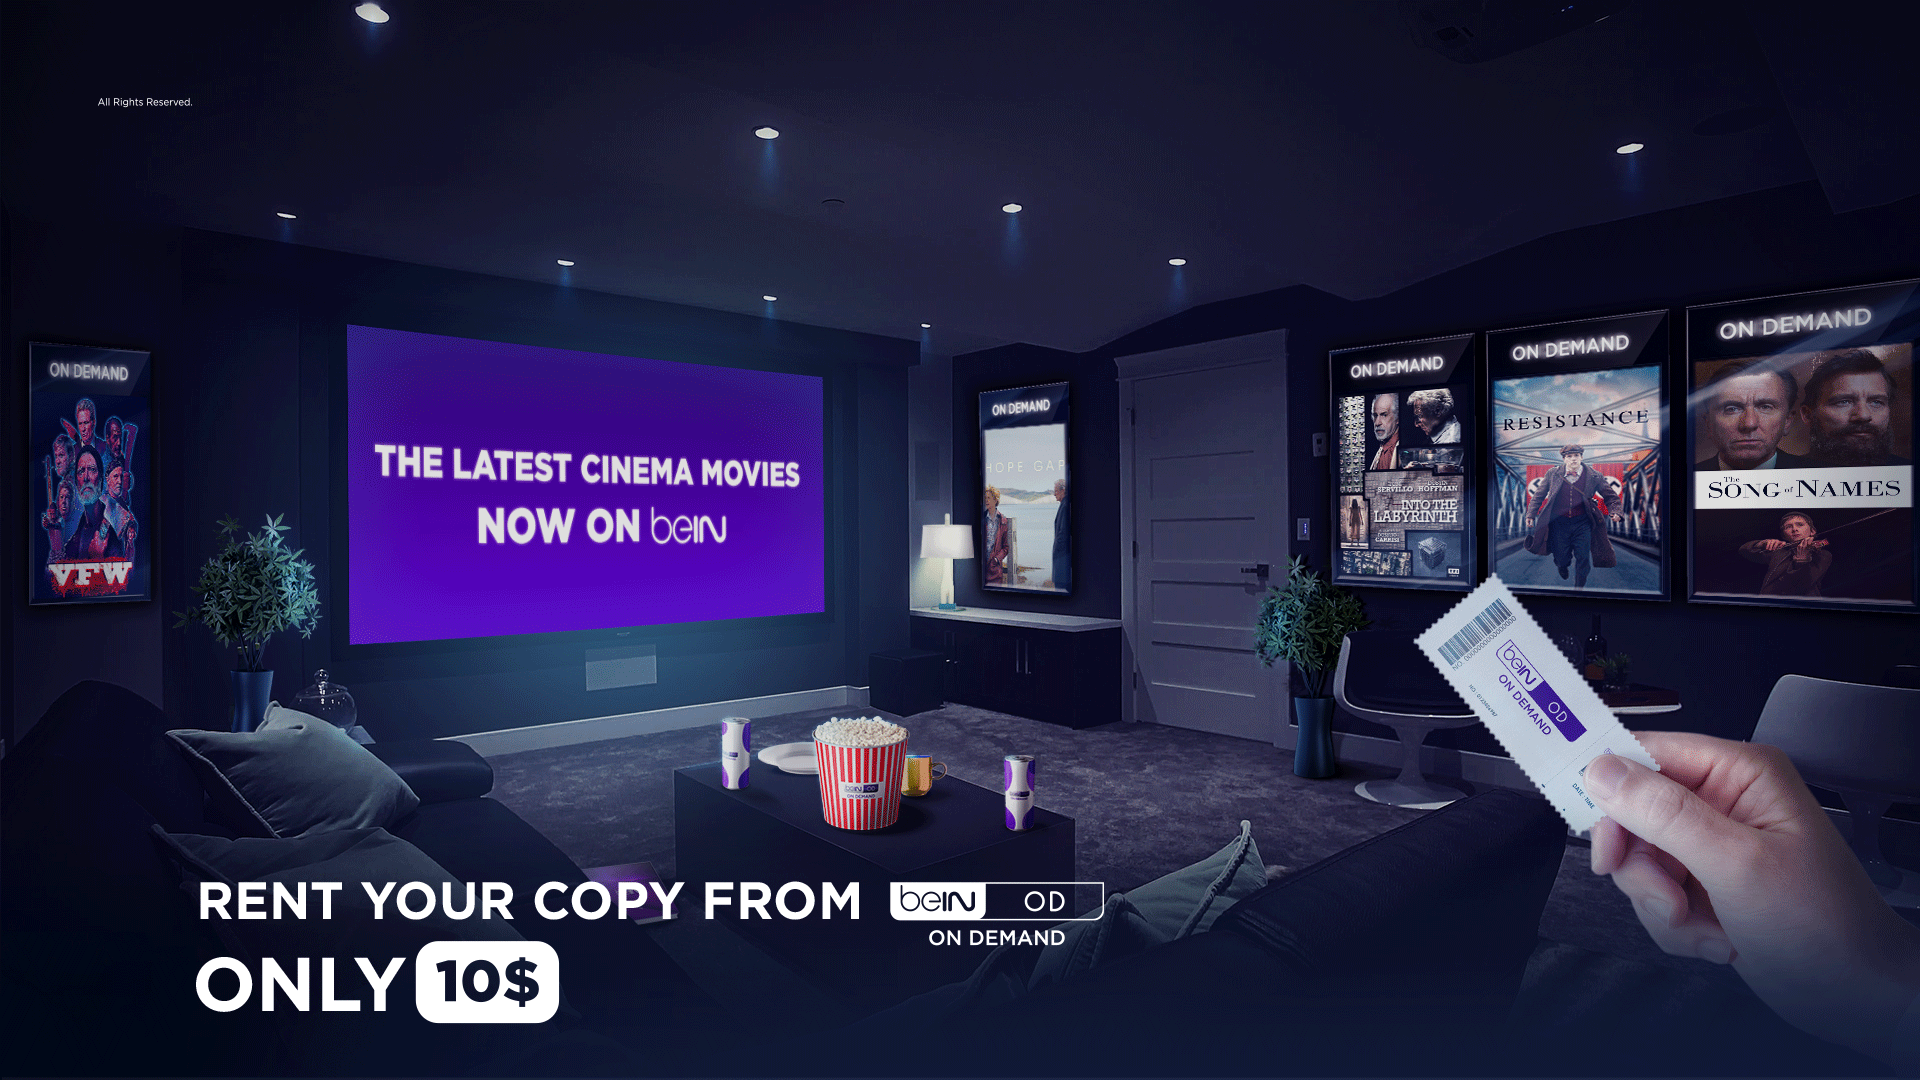 beIN launches amazing new cinema service which offers the latest international movies